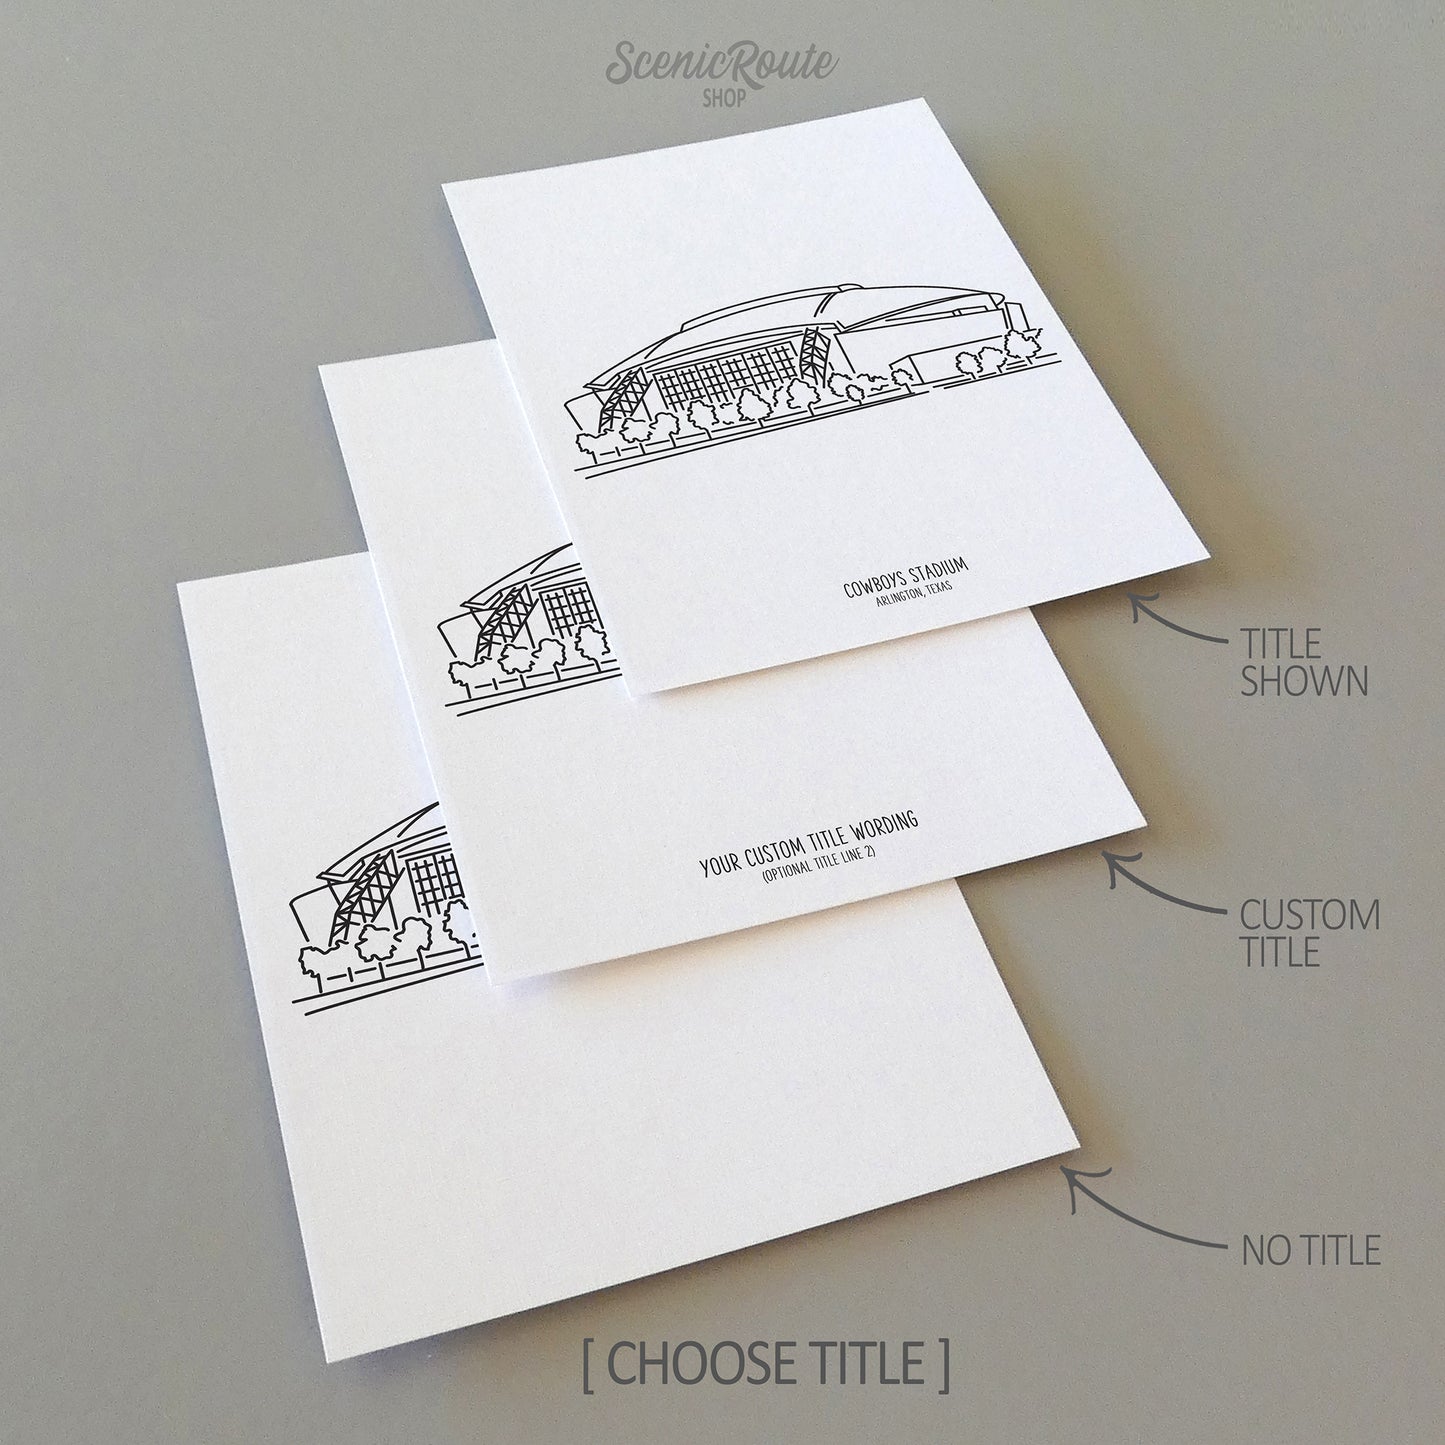 Three line art drawings of the Dallas Cowboys Stadium in Texas on white linen paper with a gray background.  The pieces are shown with title options that can be chosen and personalized.